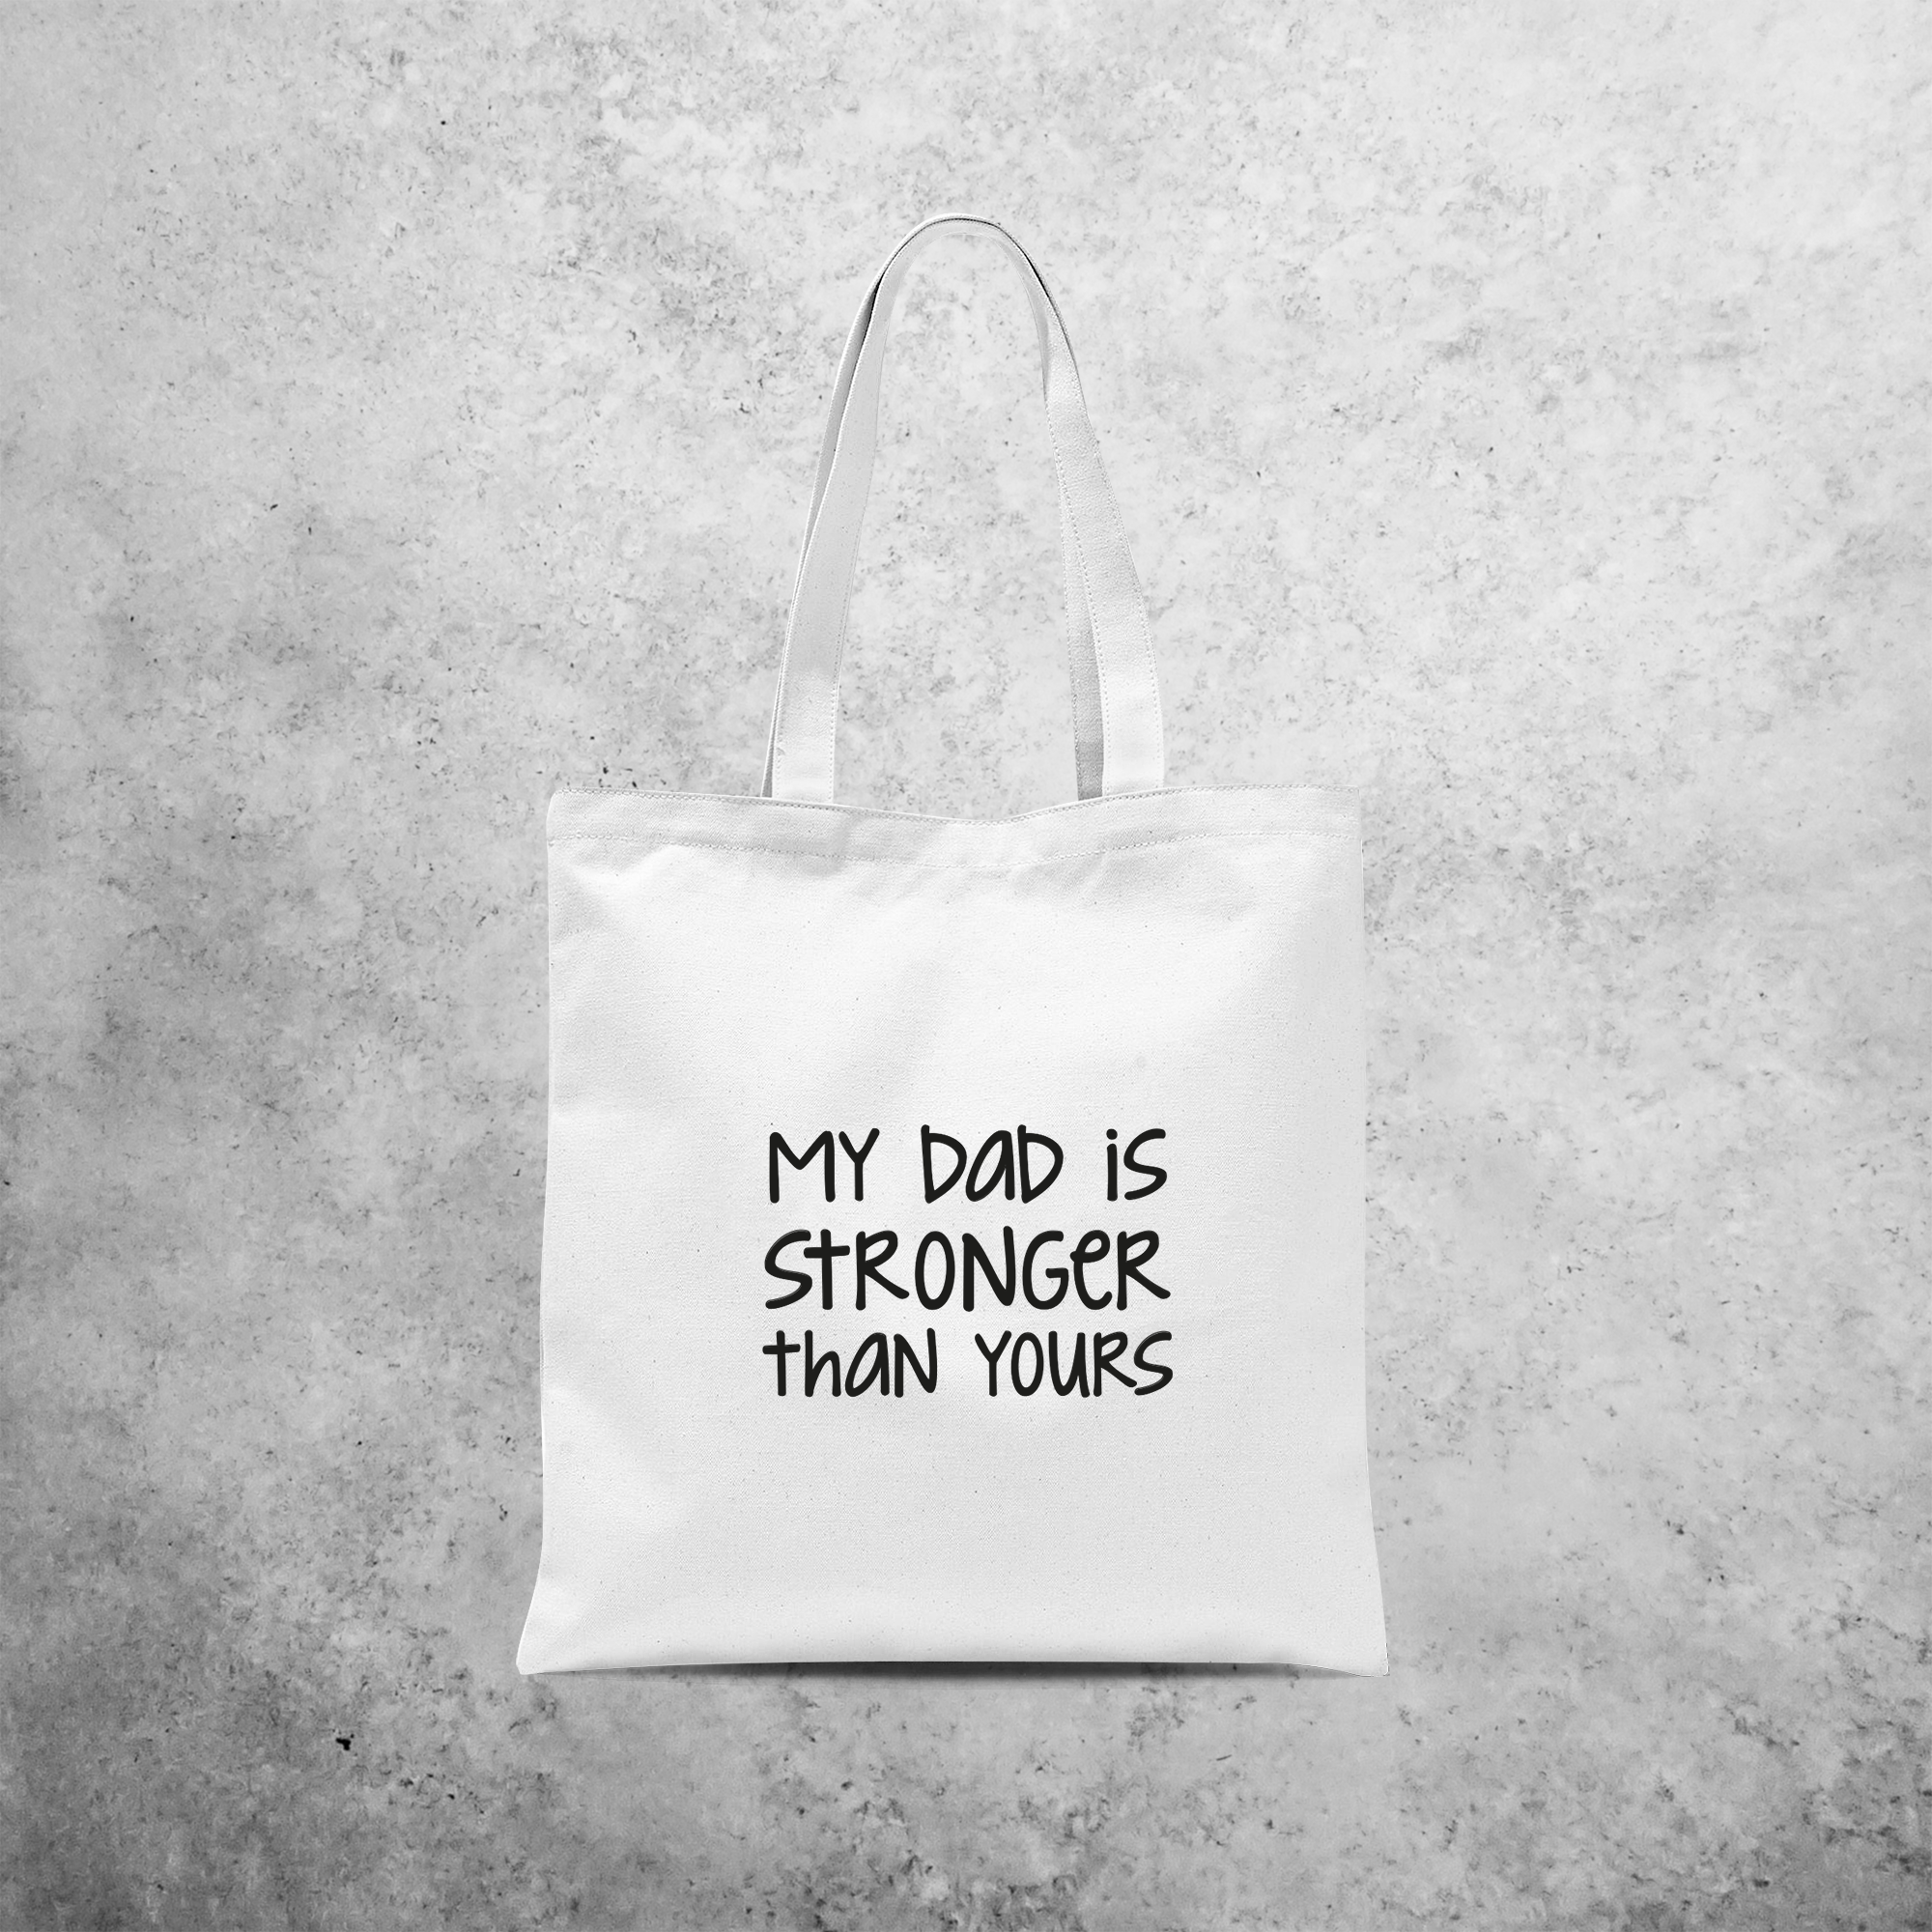 'My dad is stronger than yours' tote bag